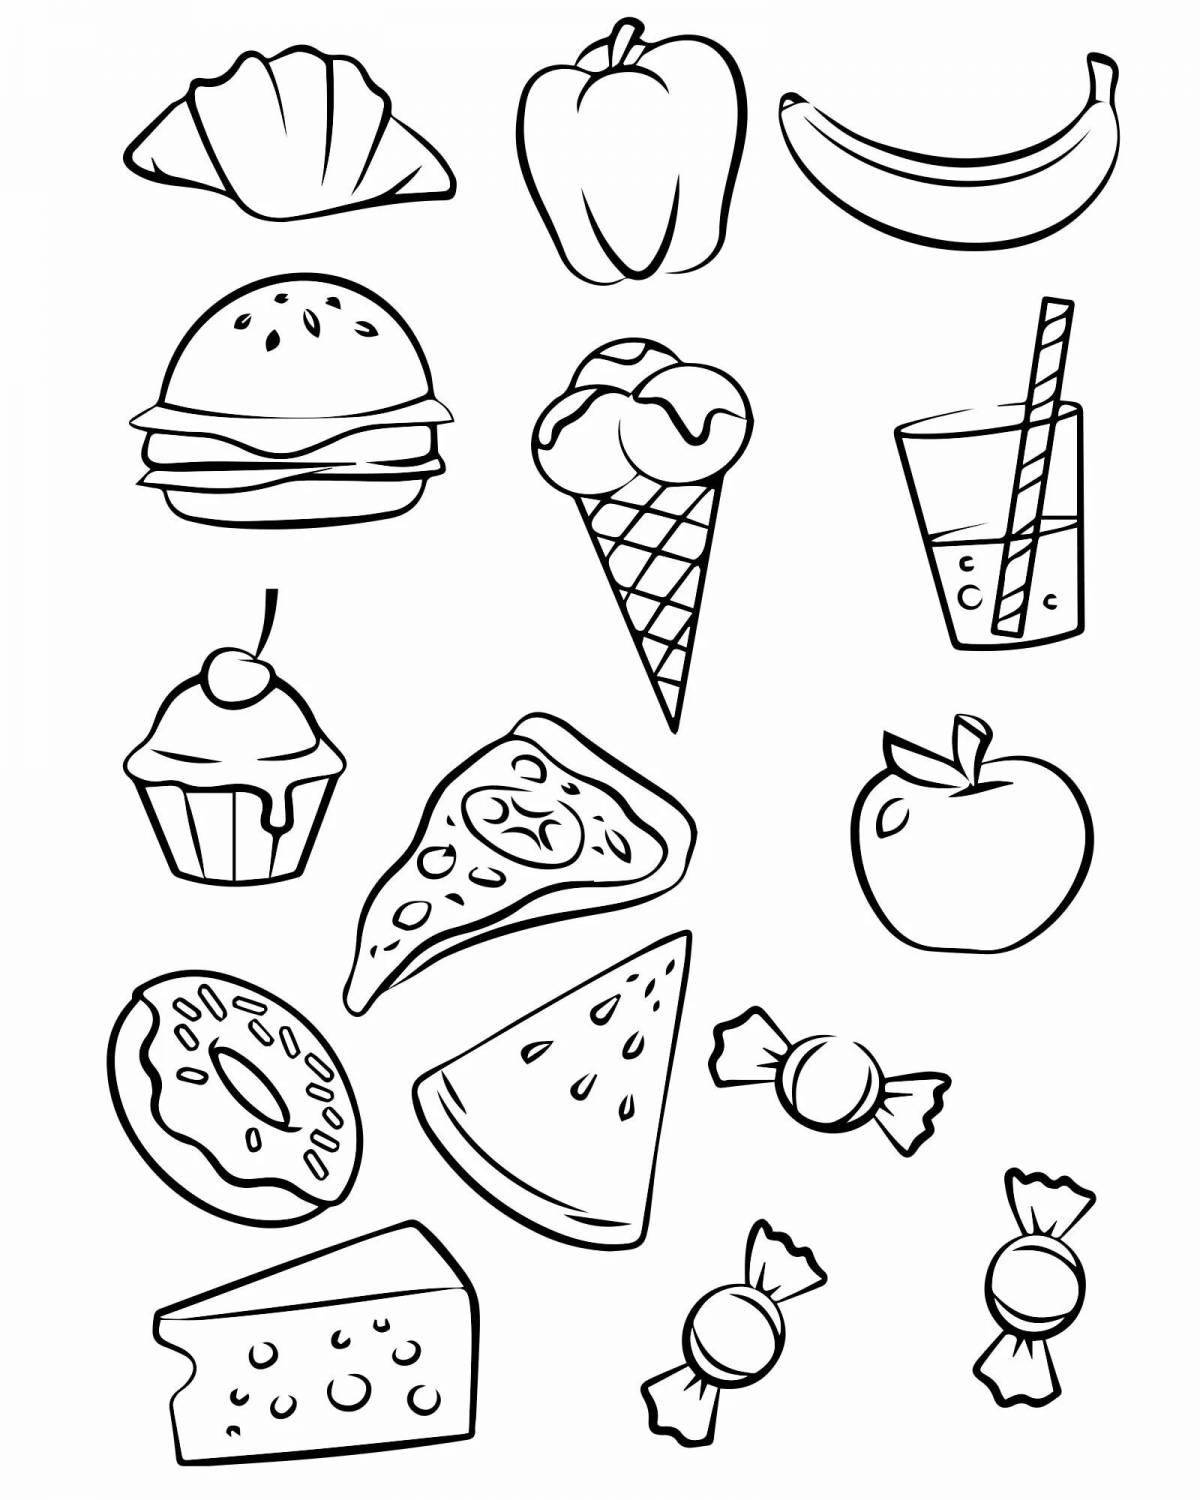 Protein-rich healthy food coloring page